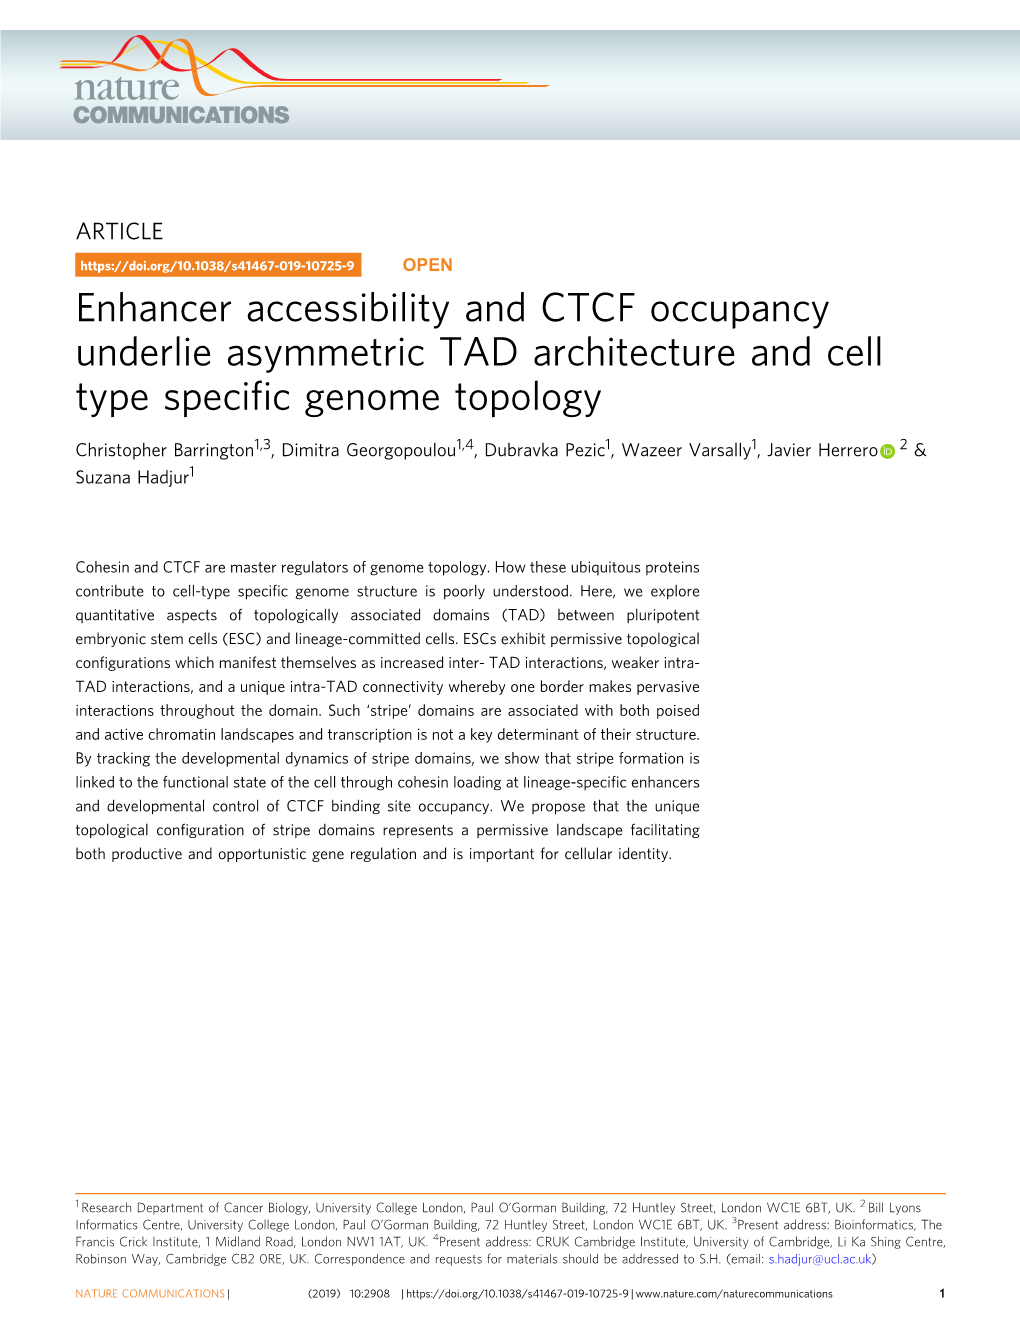 Enhancer Accessibility and CTCF Occupancy Underlie Asymmetric TAD Architecture and Cell Type Specific Genome Topology